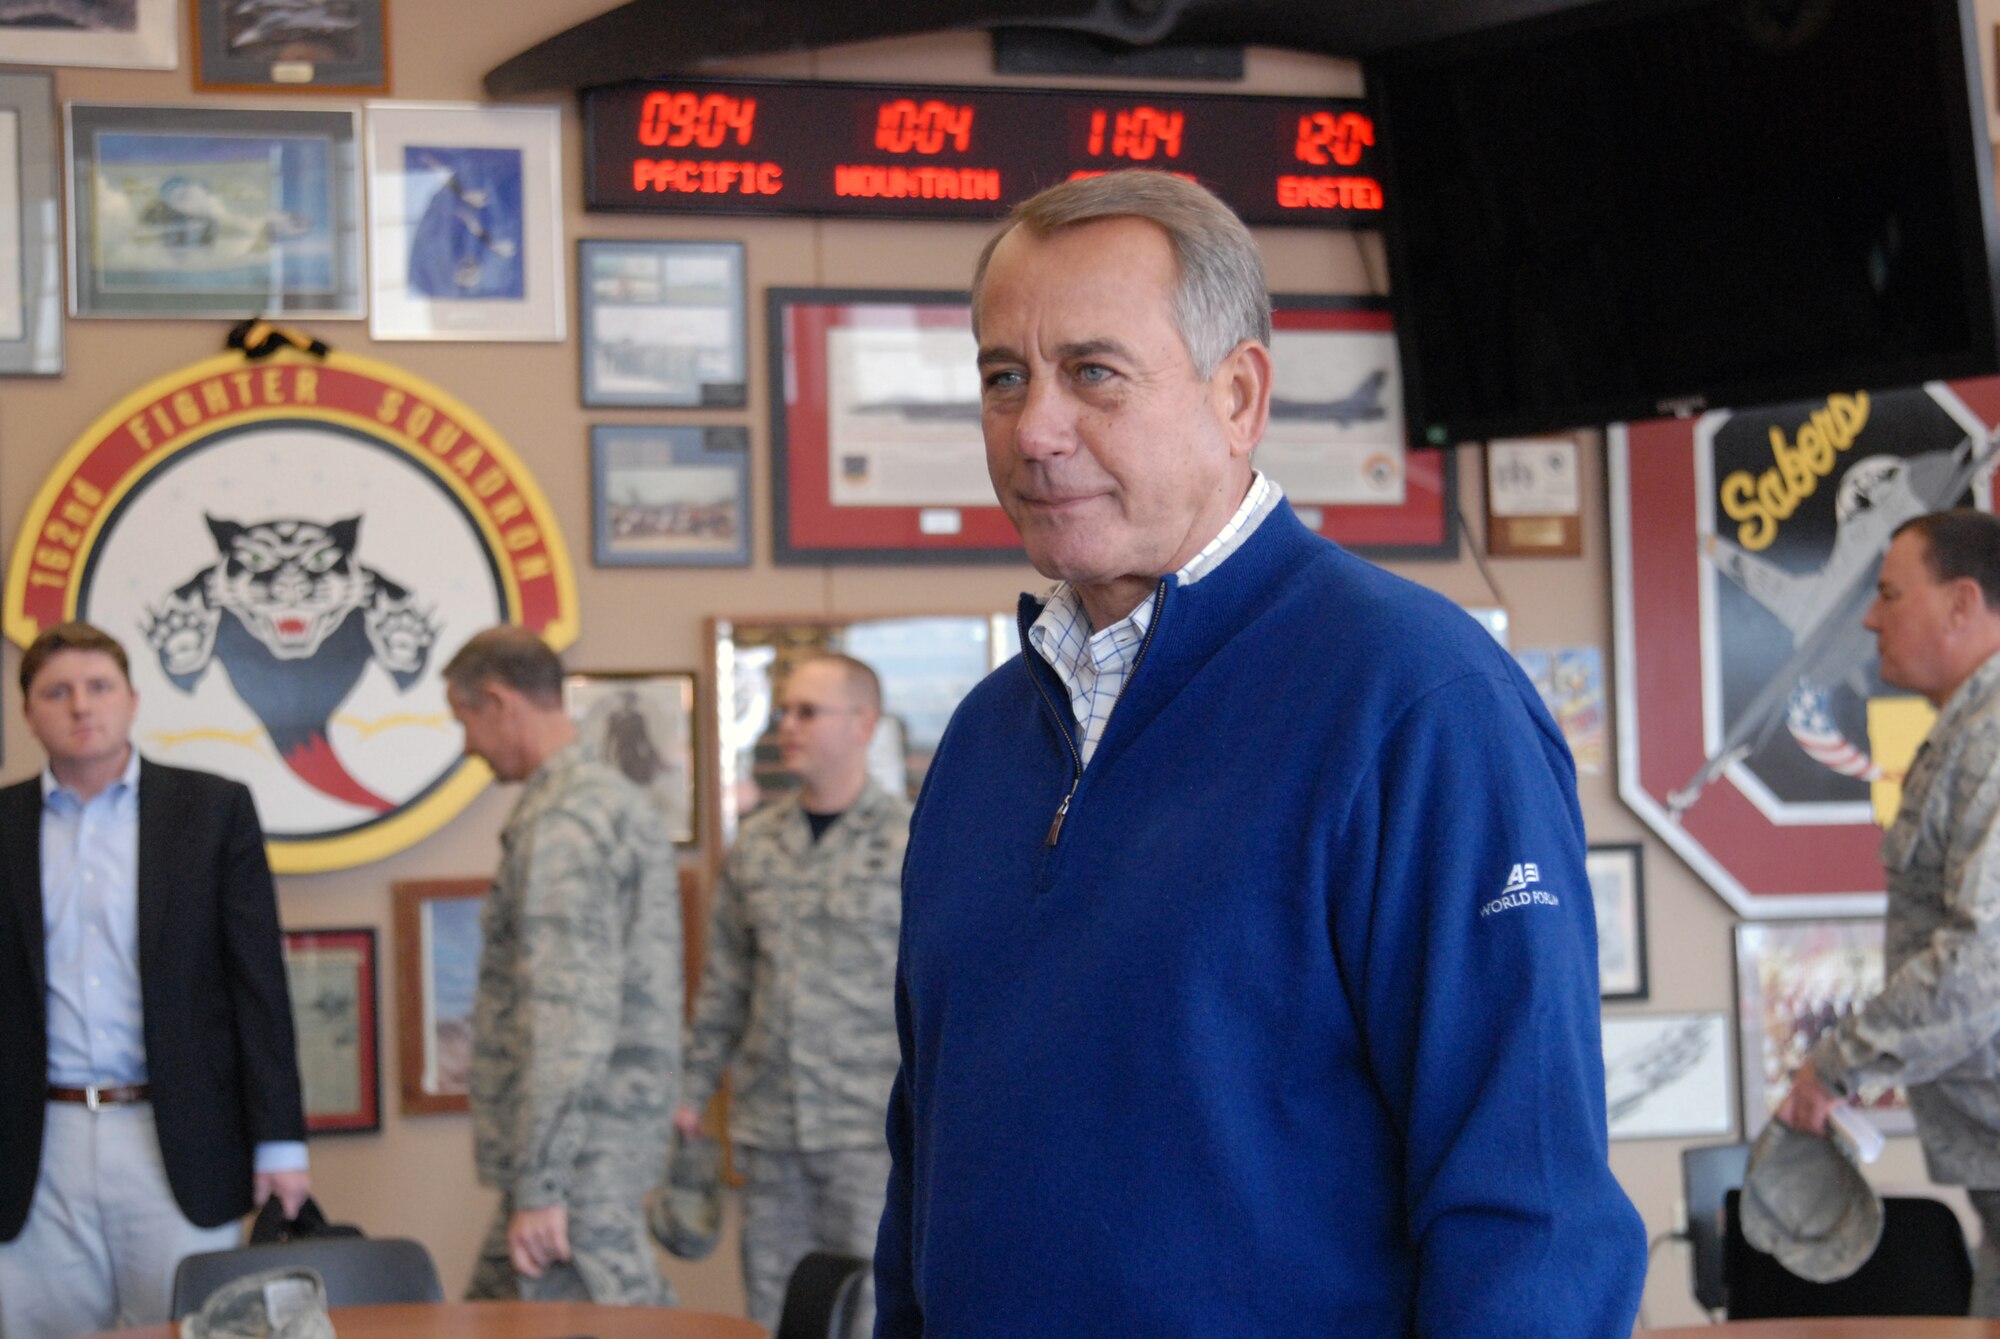 Speaker of the U.S. House of Representatives John Boehner visited Springfield Air National Guard Base, March 20, to tour the base and speak with Airmen.Interim Adjutant General of the Ohio National Guard Maj. Gen. Mark Bartman, 178th Wing Commander Col. Gregory Schnulo and Command Chief Master Sgt. Ottis LeMaster guided Boehner throughout the tour. (U.S. Air National Guard photo by Airman Rachel Simones/Released)